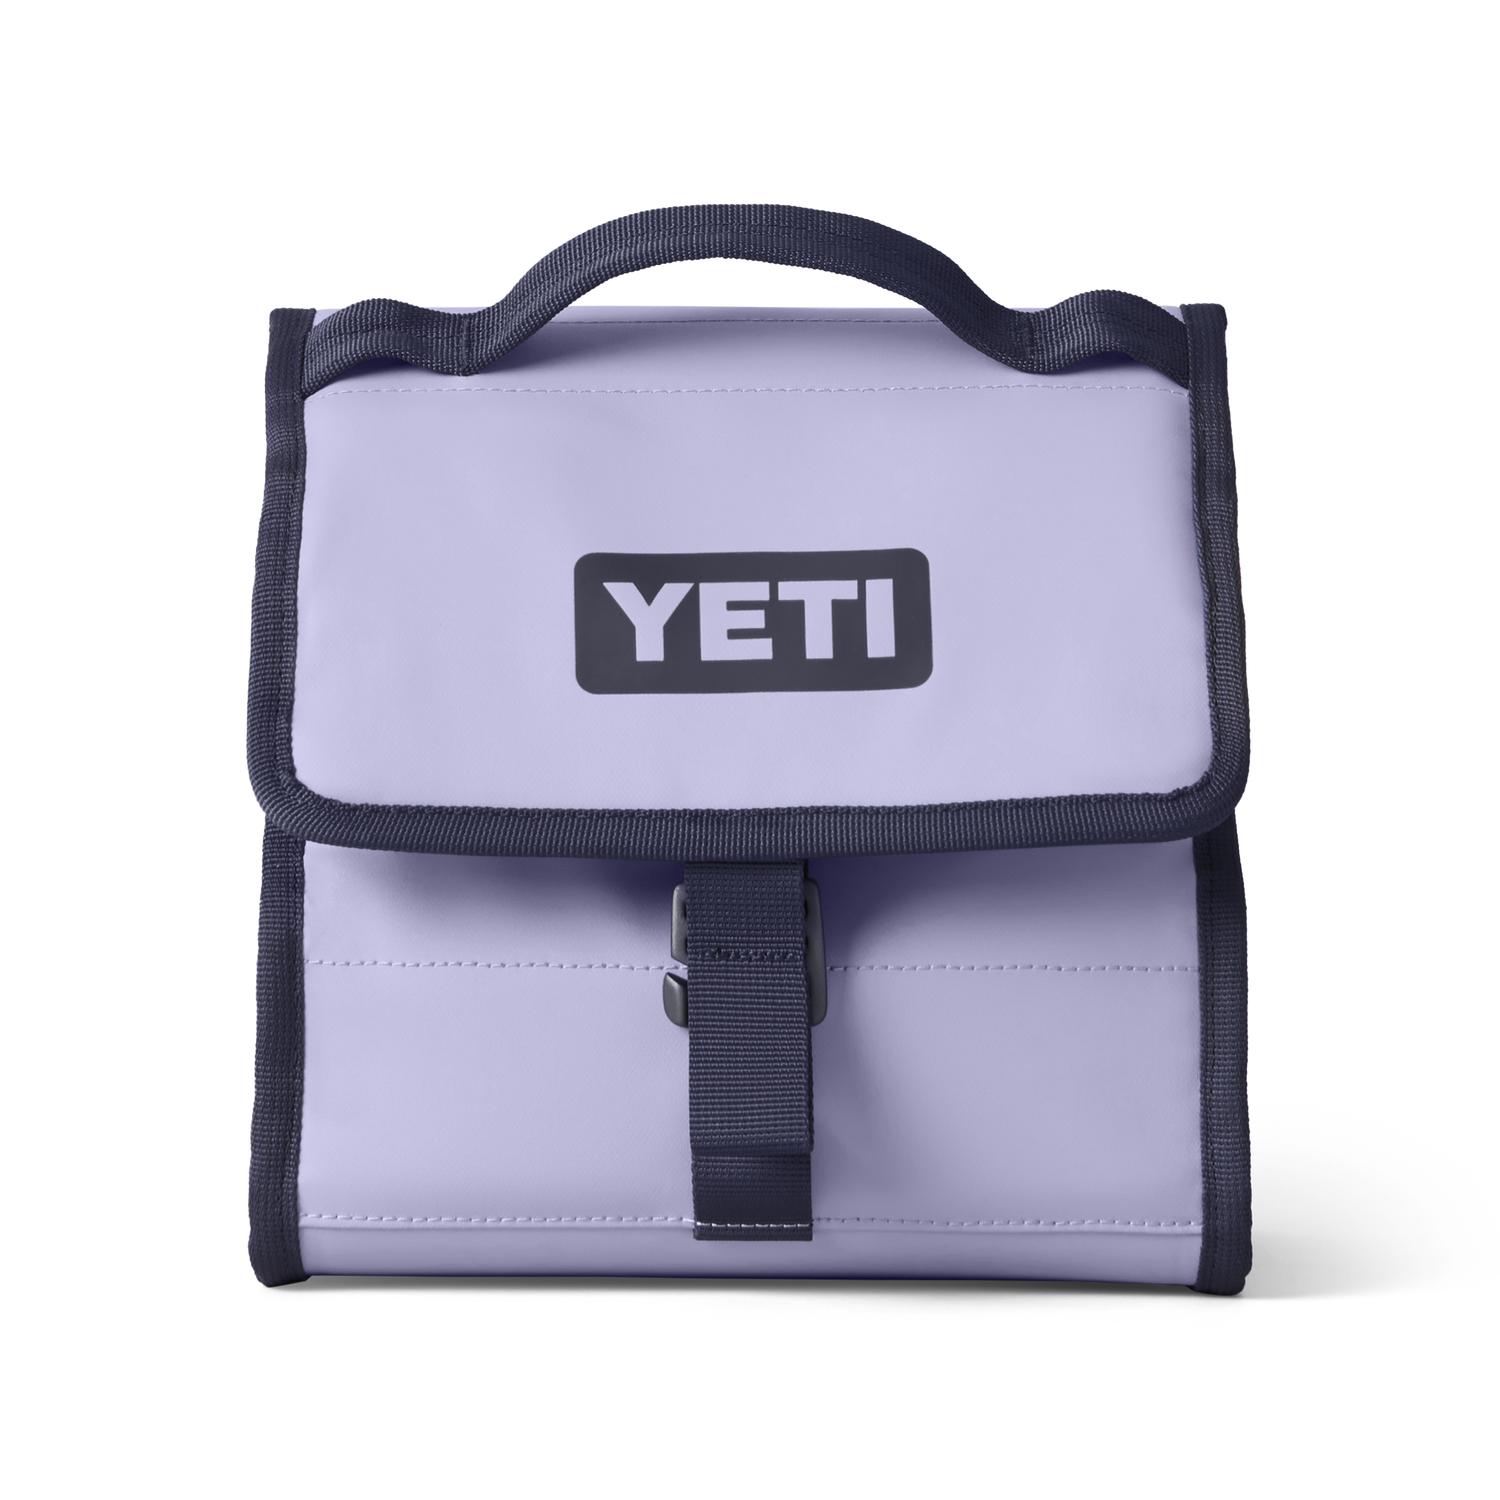 Thing Of The Week: YETI Fall 2021 Collection